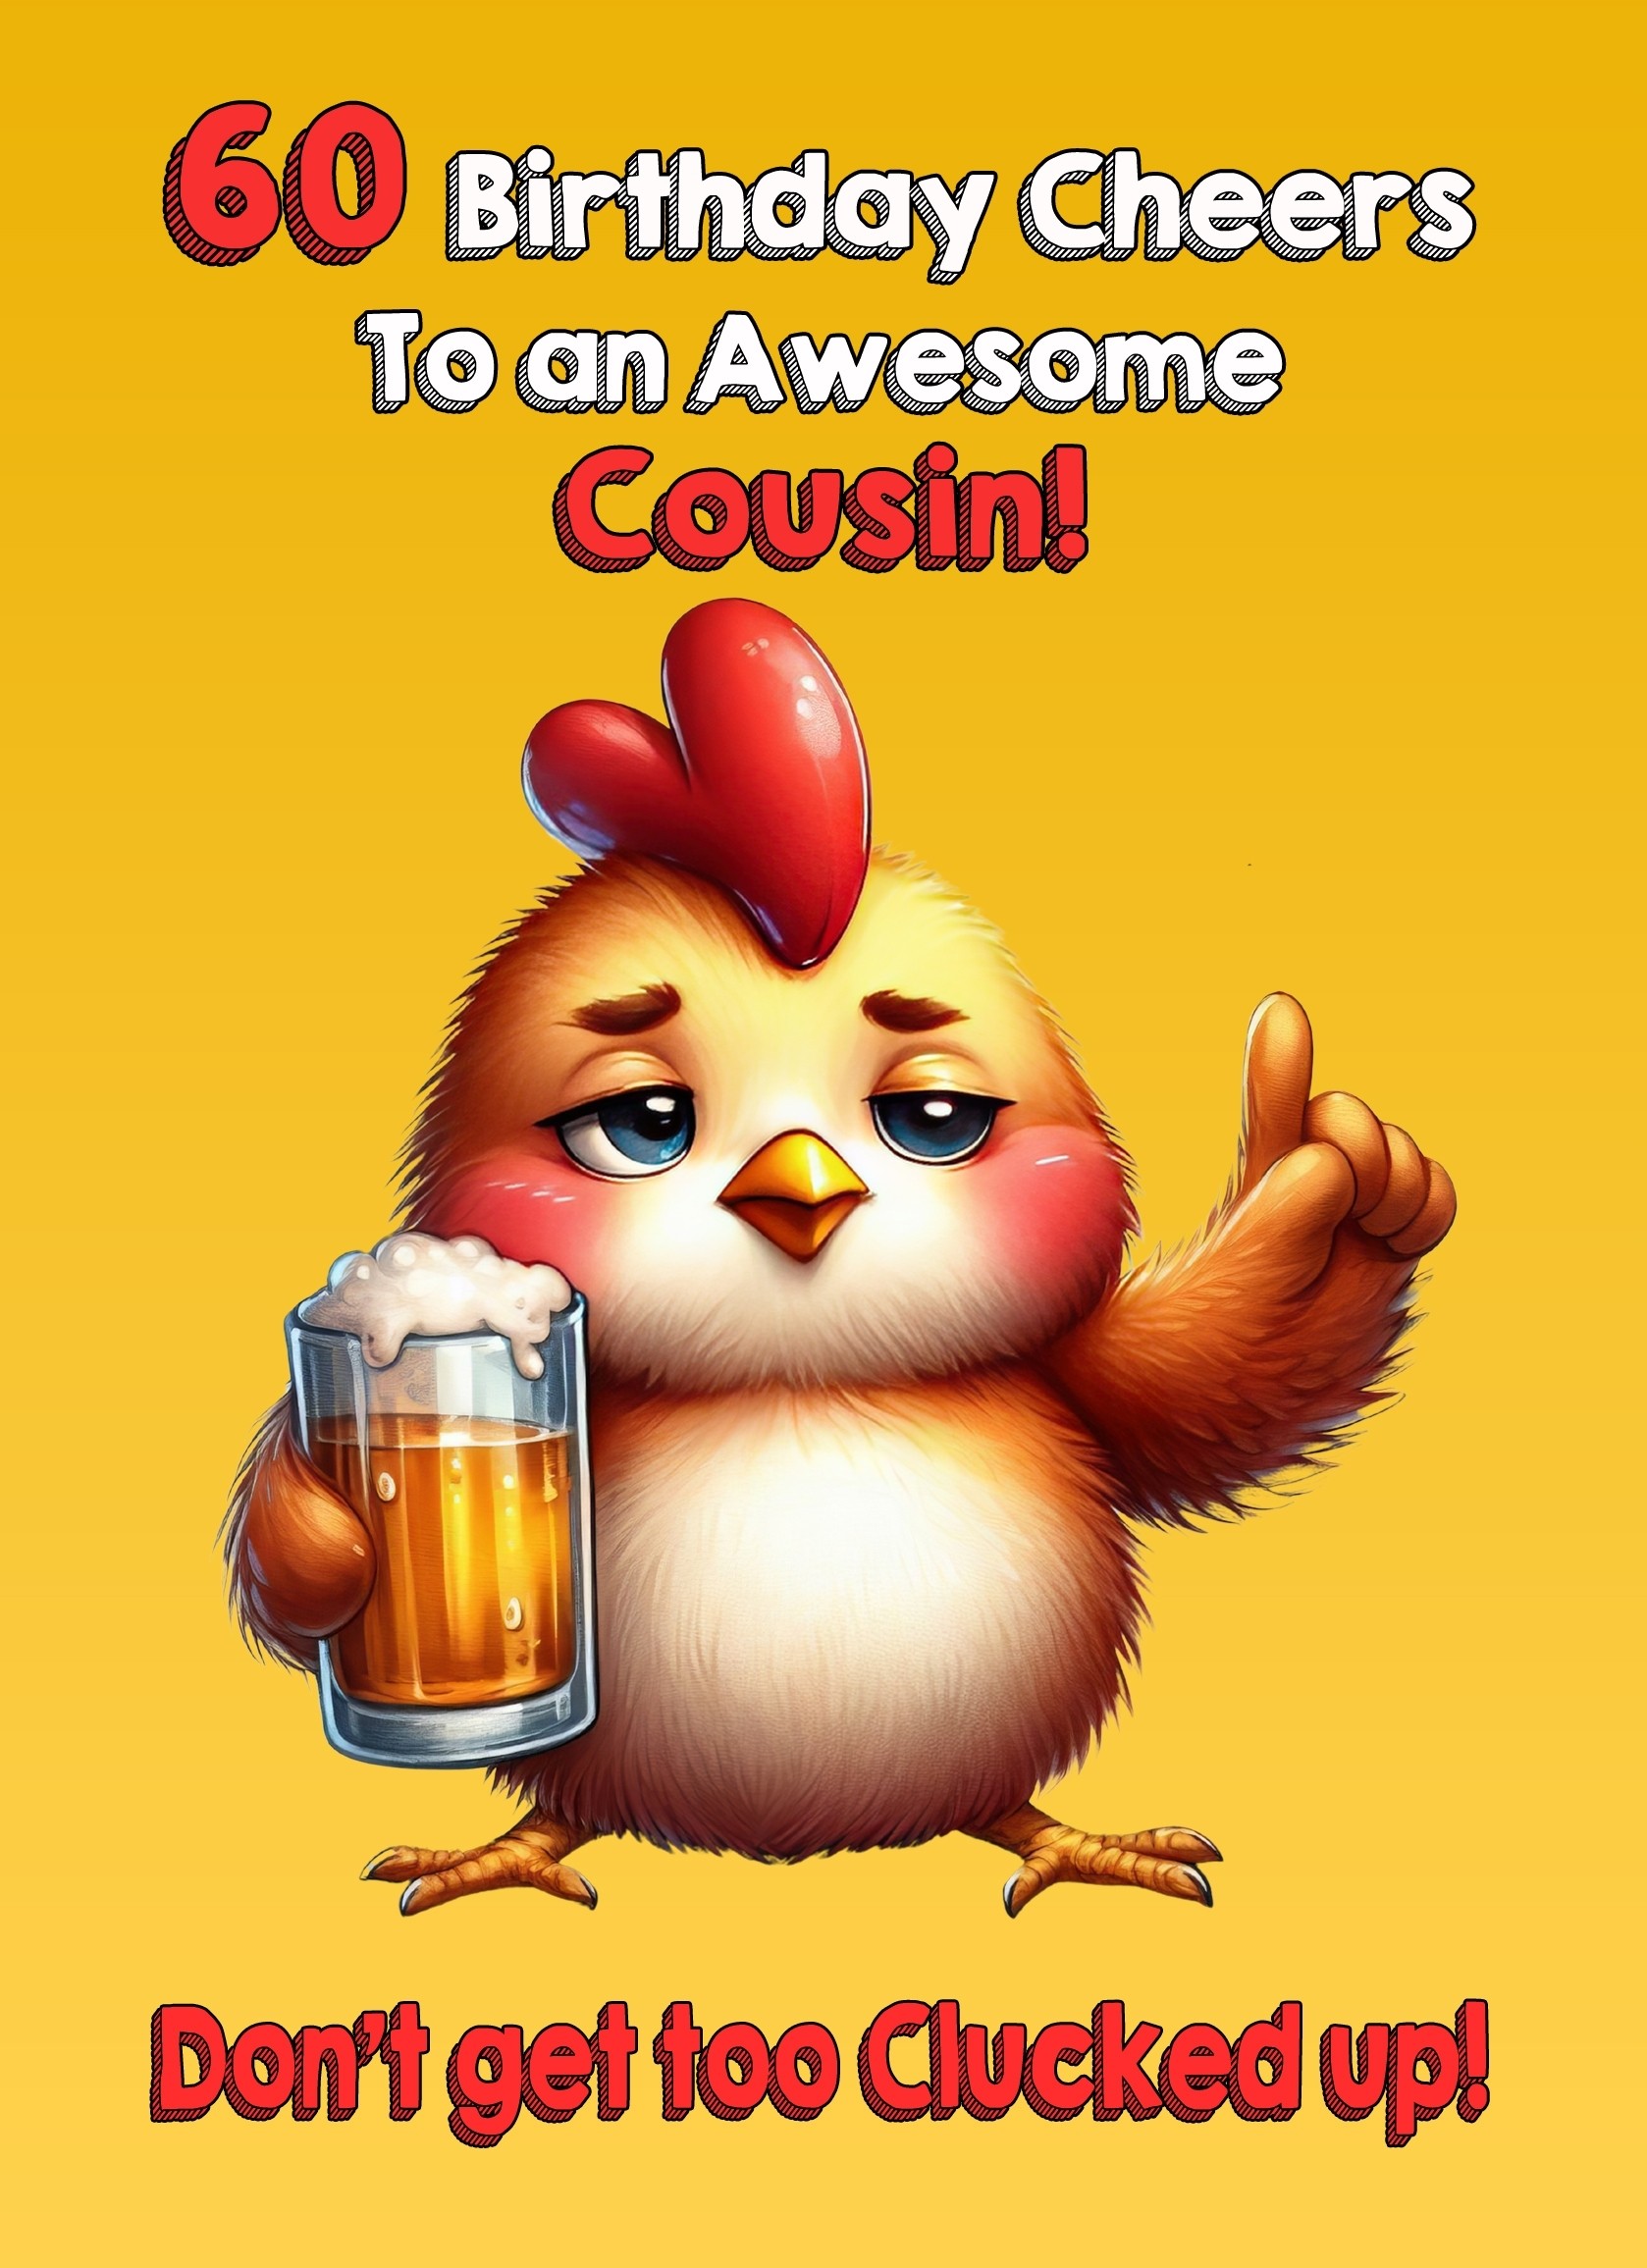 Cousin 60th Birthday Card (Funny Beer Chicken Humour)